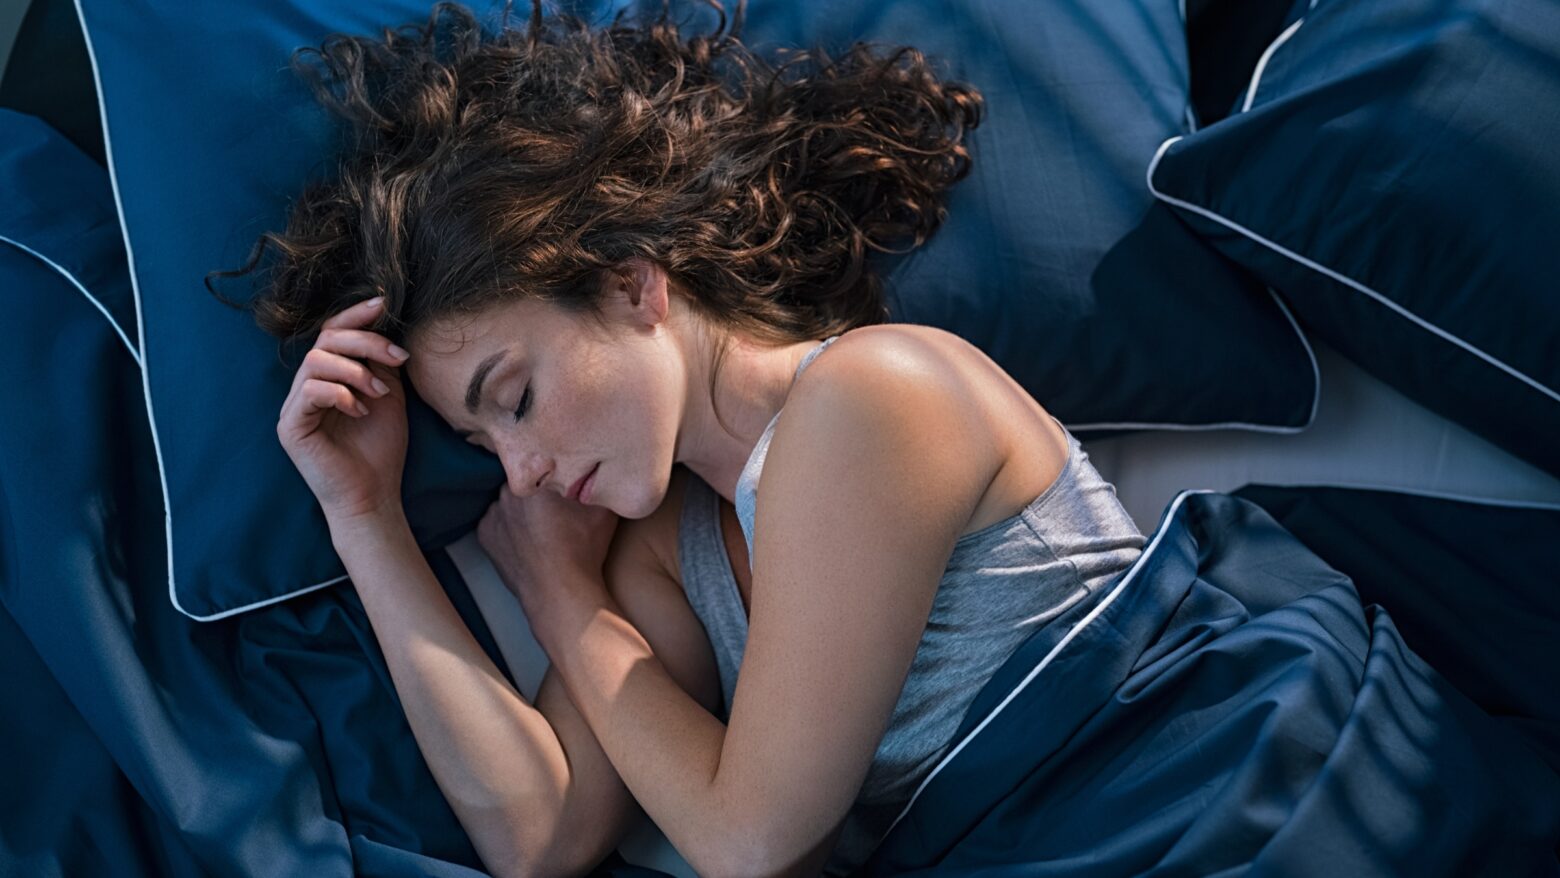 Woman asleep in a bed with dark blue sheets.